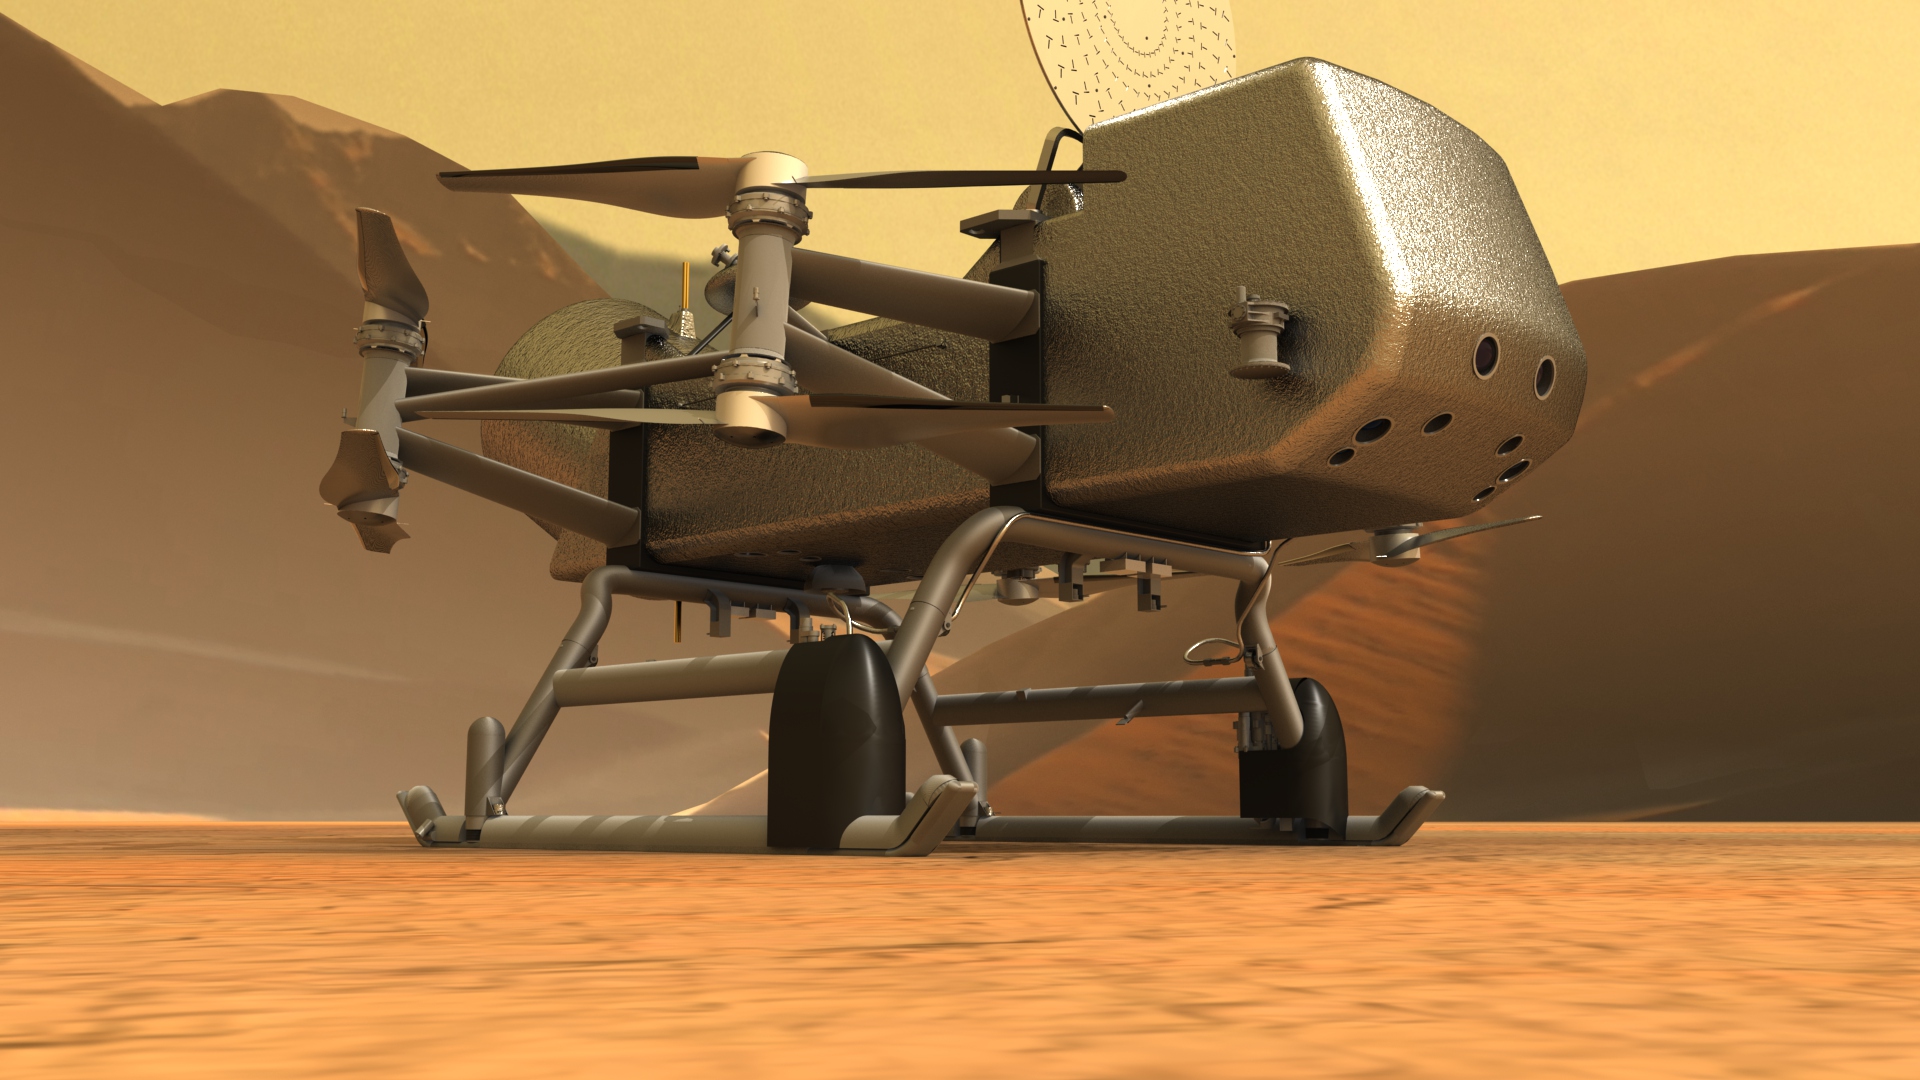 Artist rendering of Dragonfly on Titan’s surface.